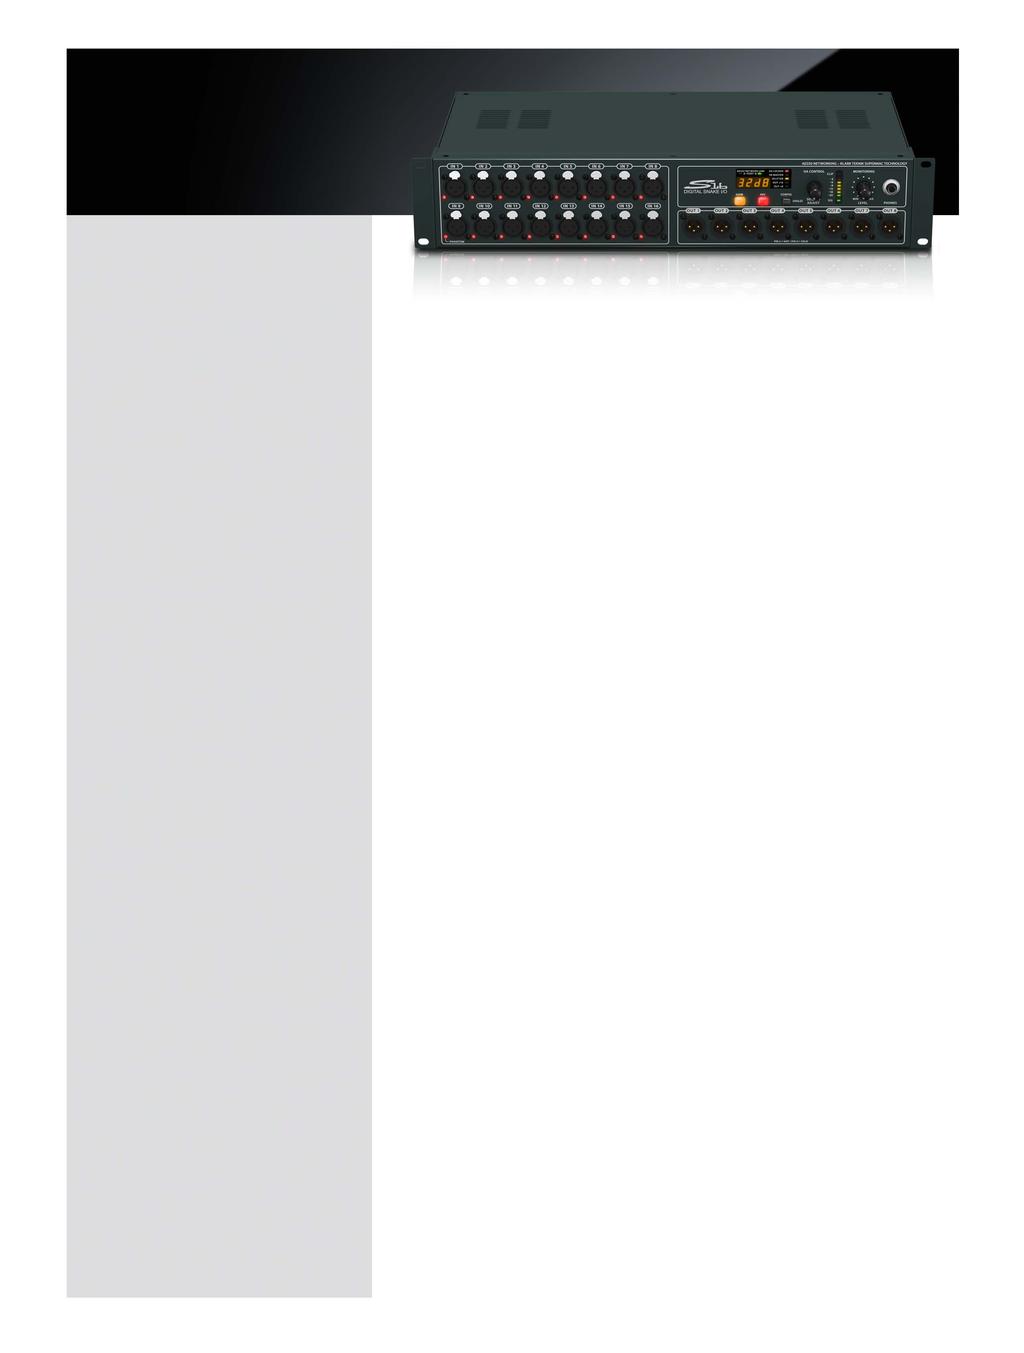 Mixer Accessories I/O Box with 16 Remote-Controllable Mic/Line Inputs, 8 Outputs and AES50 Networking featuring KLARK TEKNIK SuperMac Technology 16 fully programmable and remotecontrollable